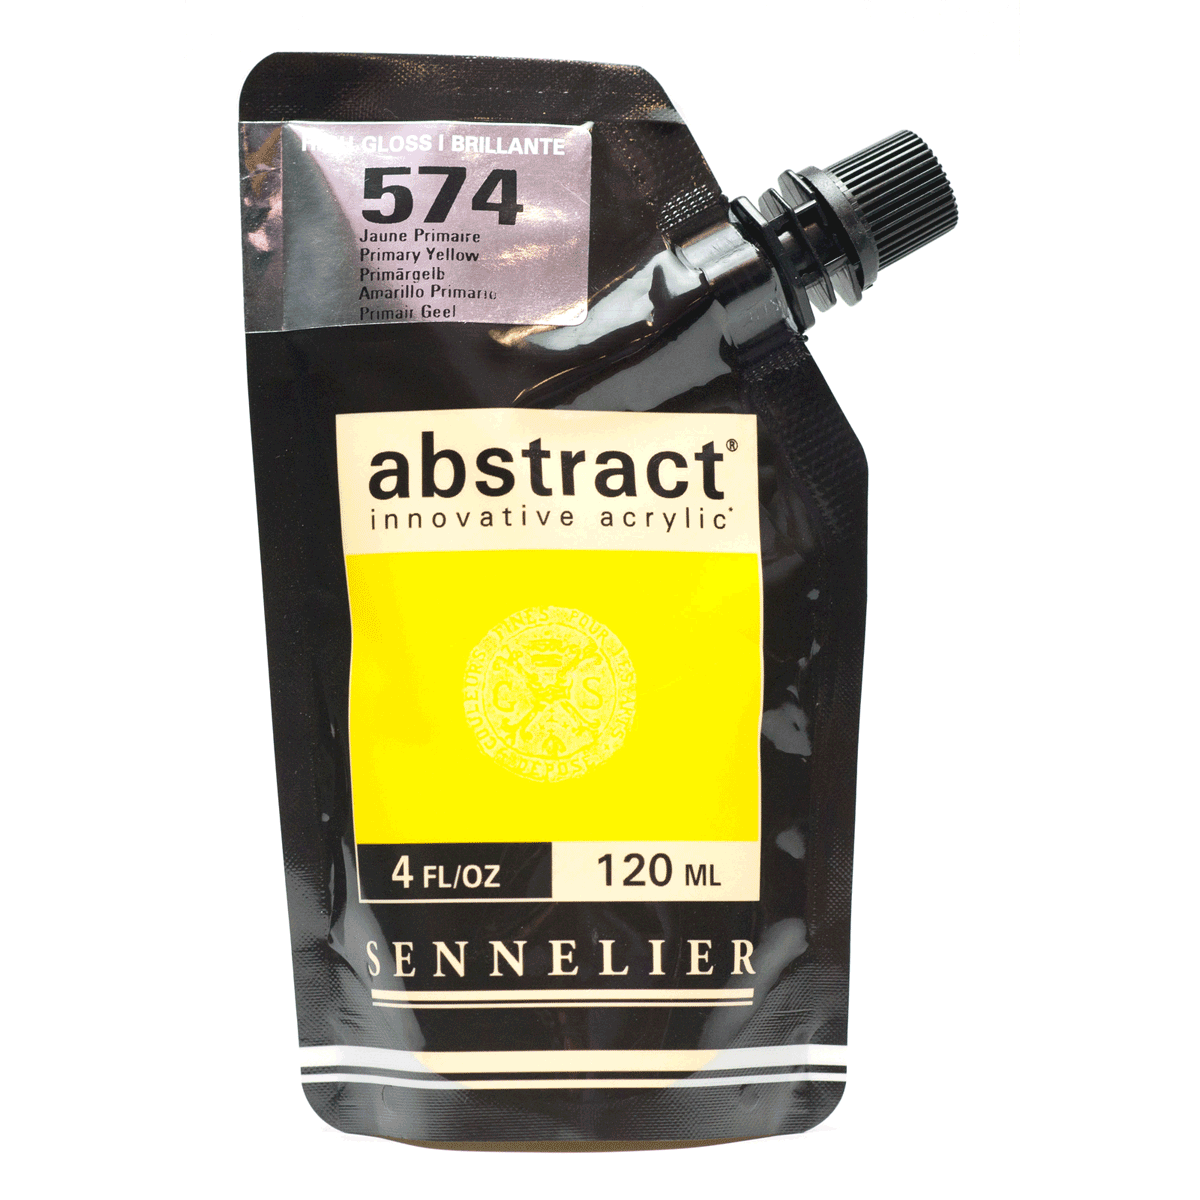 Abstract Acrylic Pouch - High Gloss 574B Primary Yellow 120ml